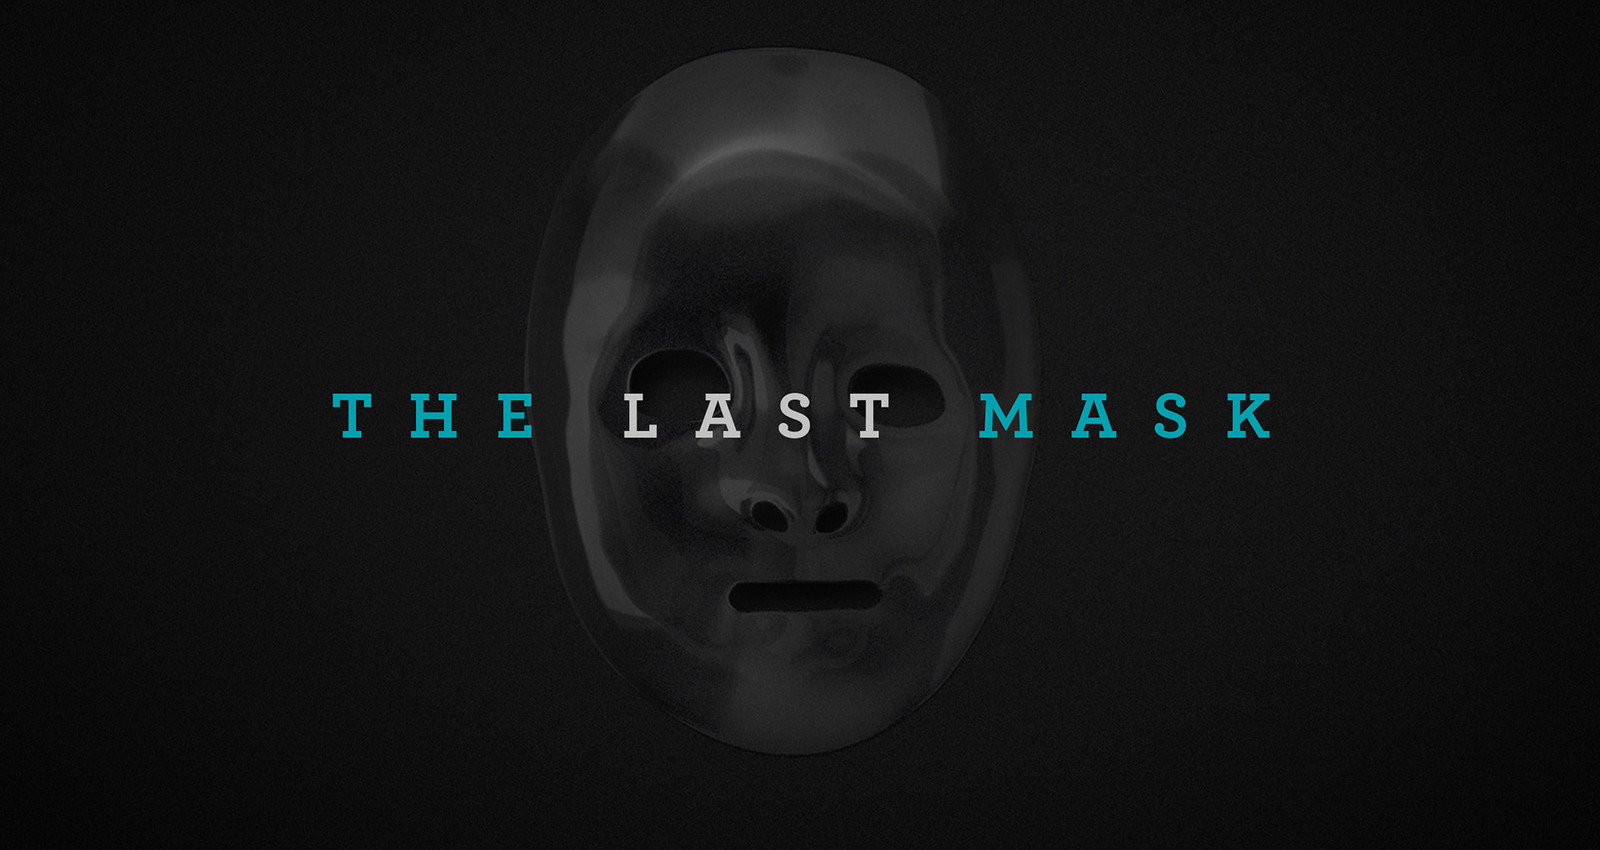 The Last Mask